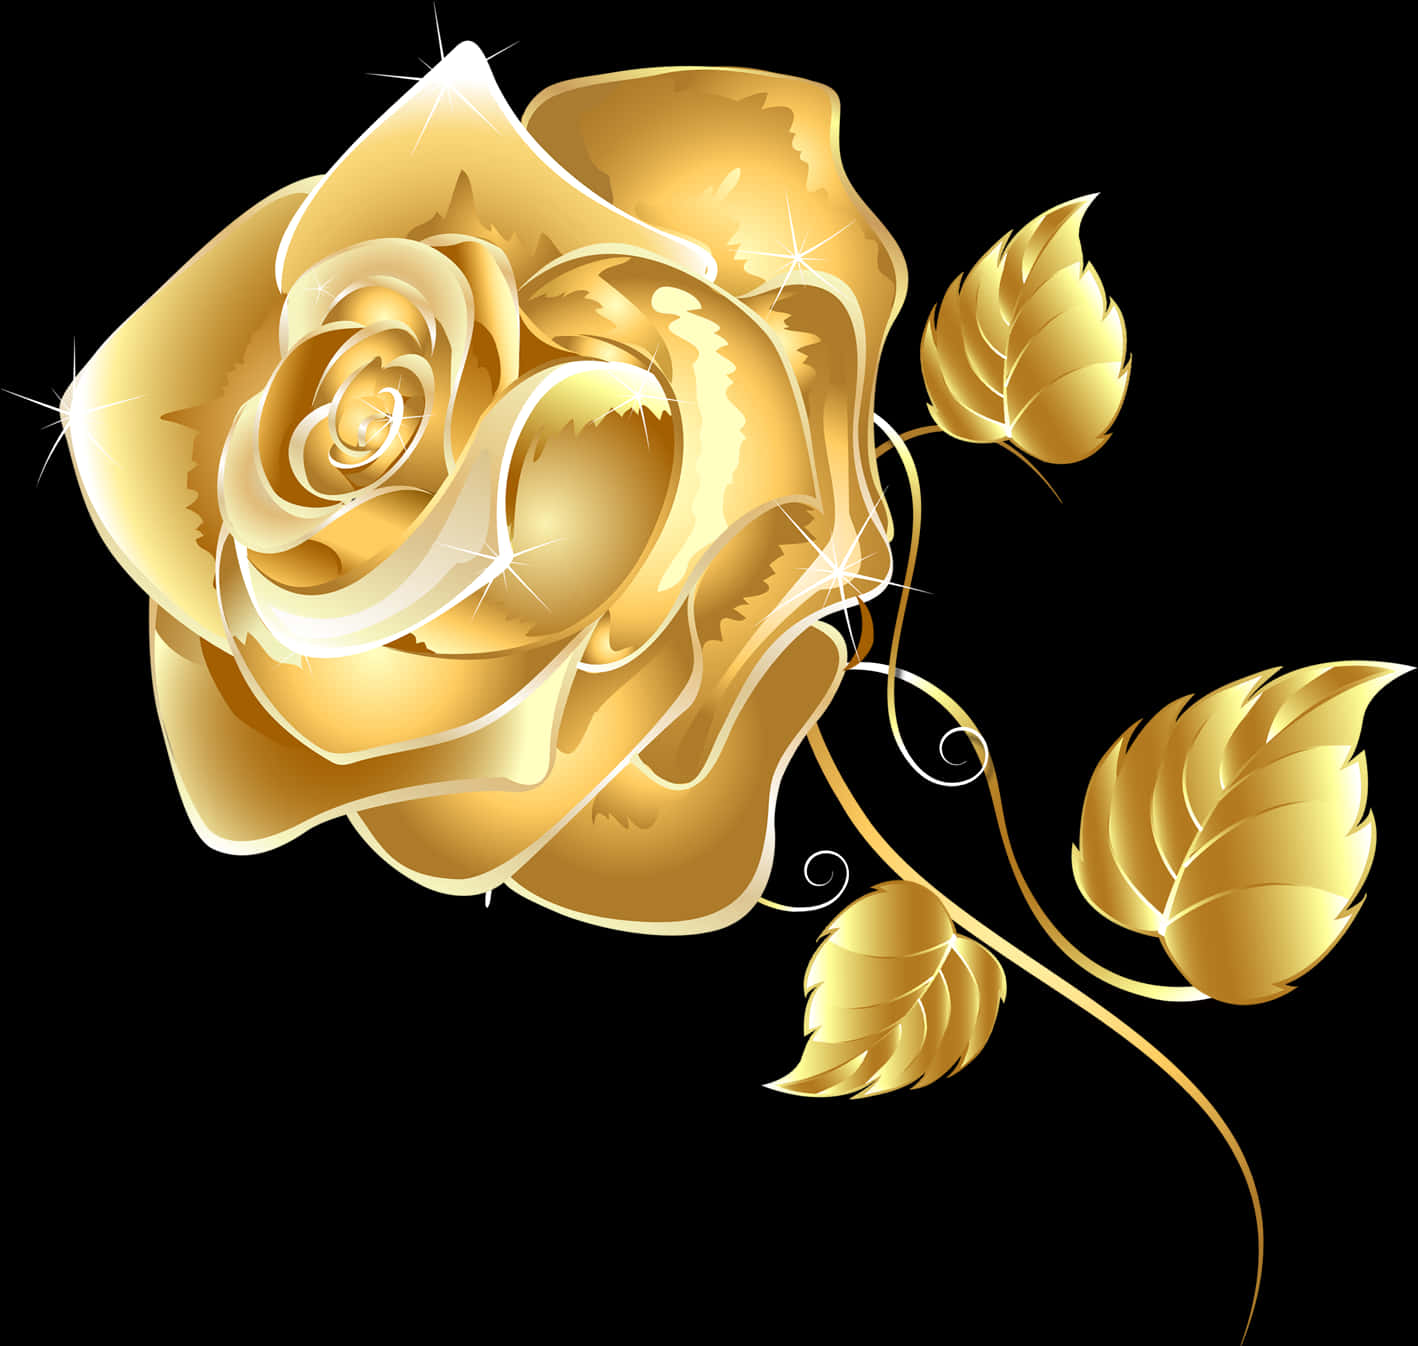 A Gold Rose With Leaves